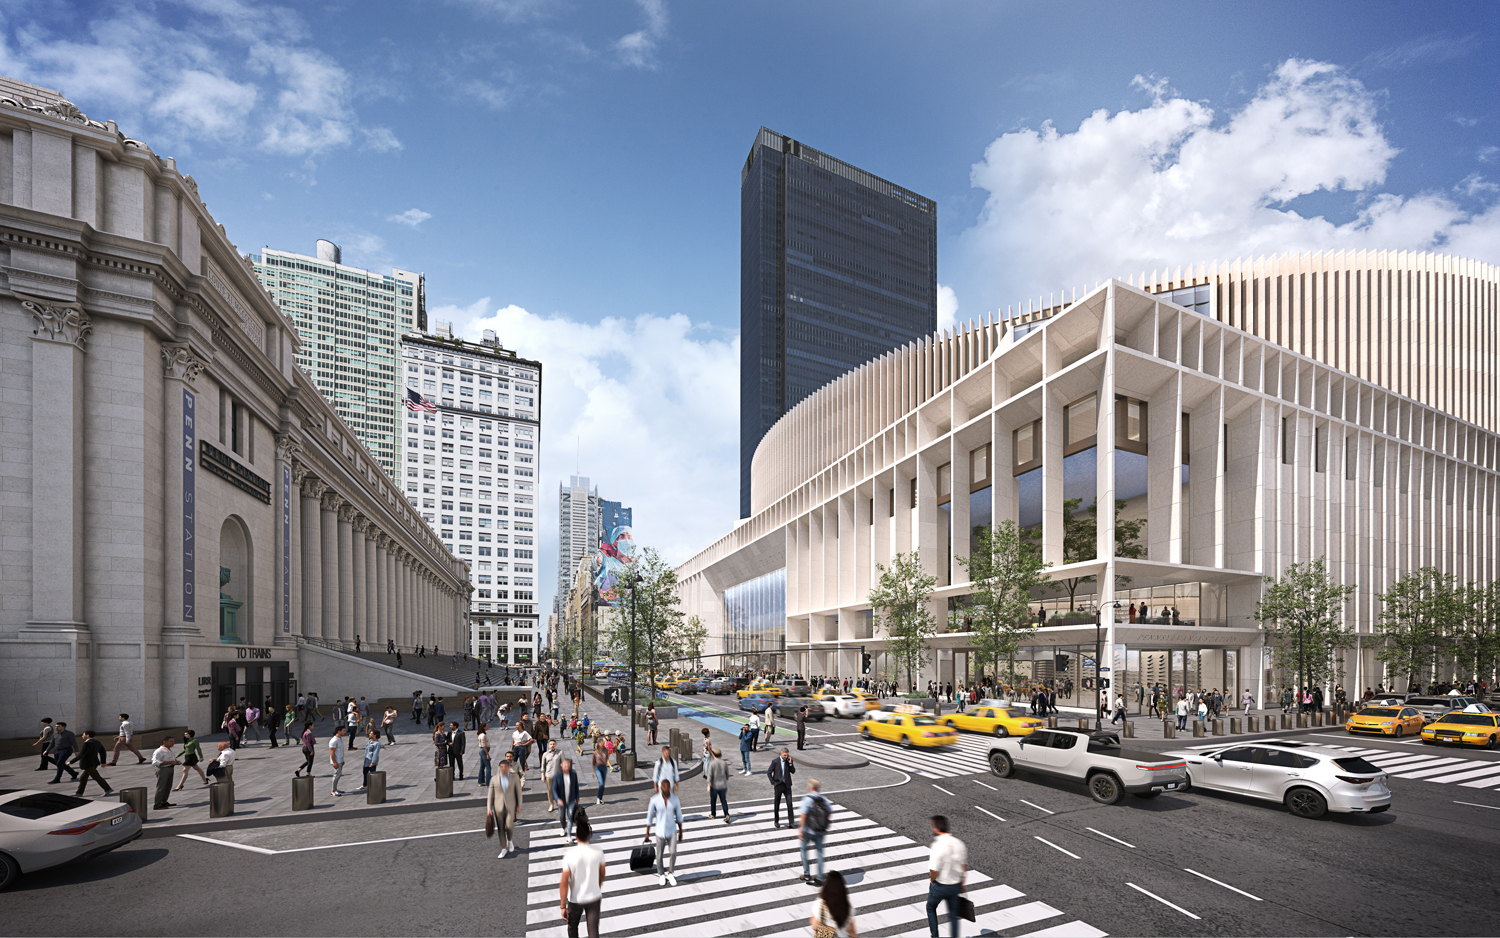 There are now dueling designs for the new Penn Station